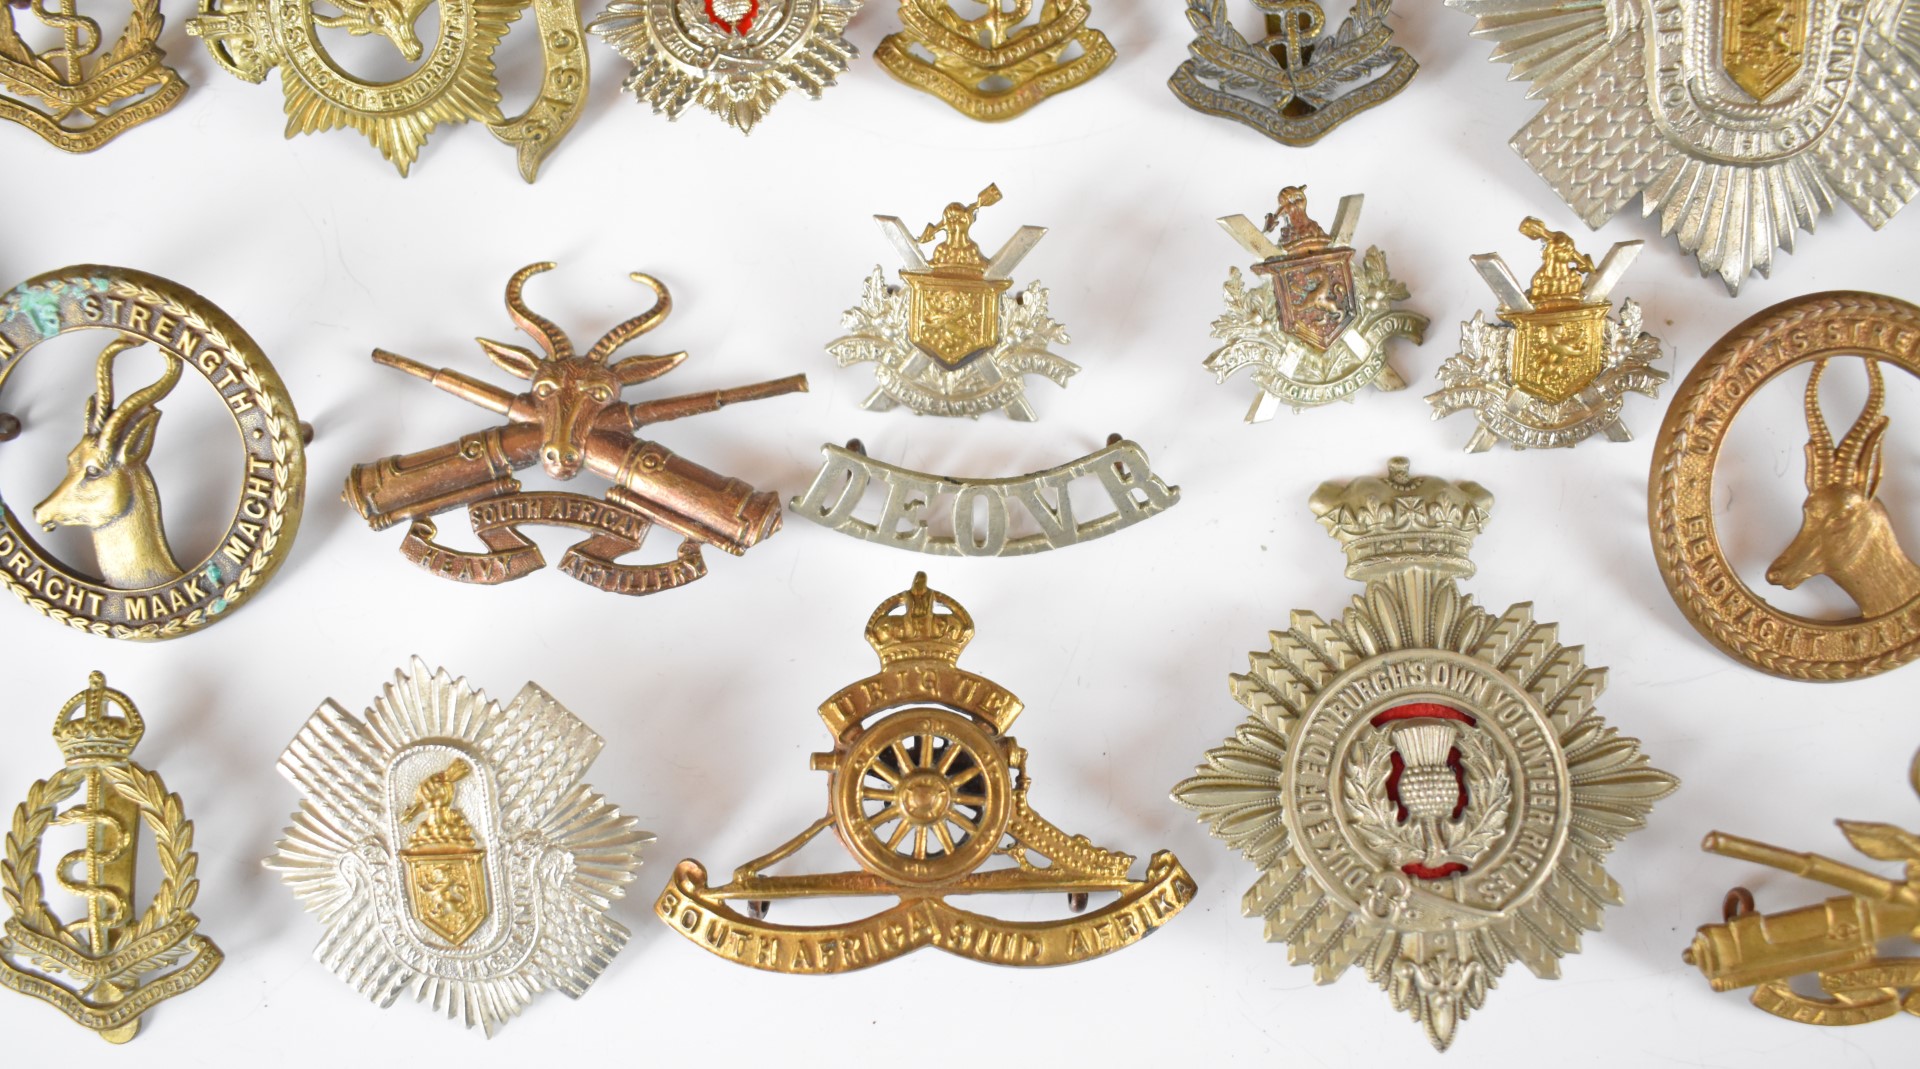 Approximately 20 South African badges including Cape Town Highlands, Duke of Edinburgh's Own - Image 4 of 6